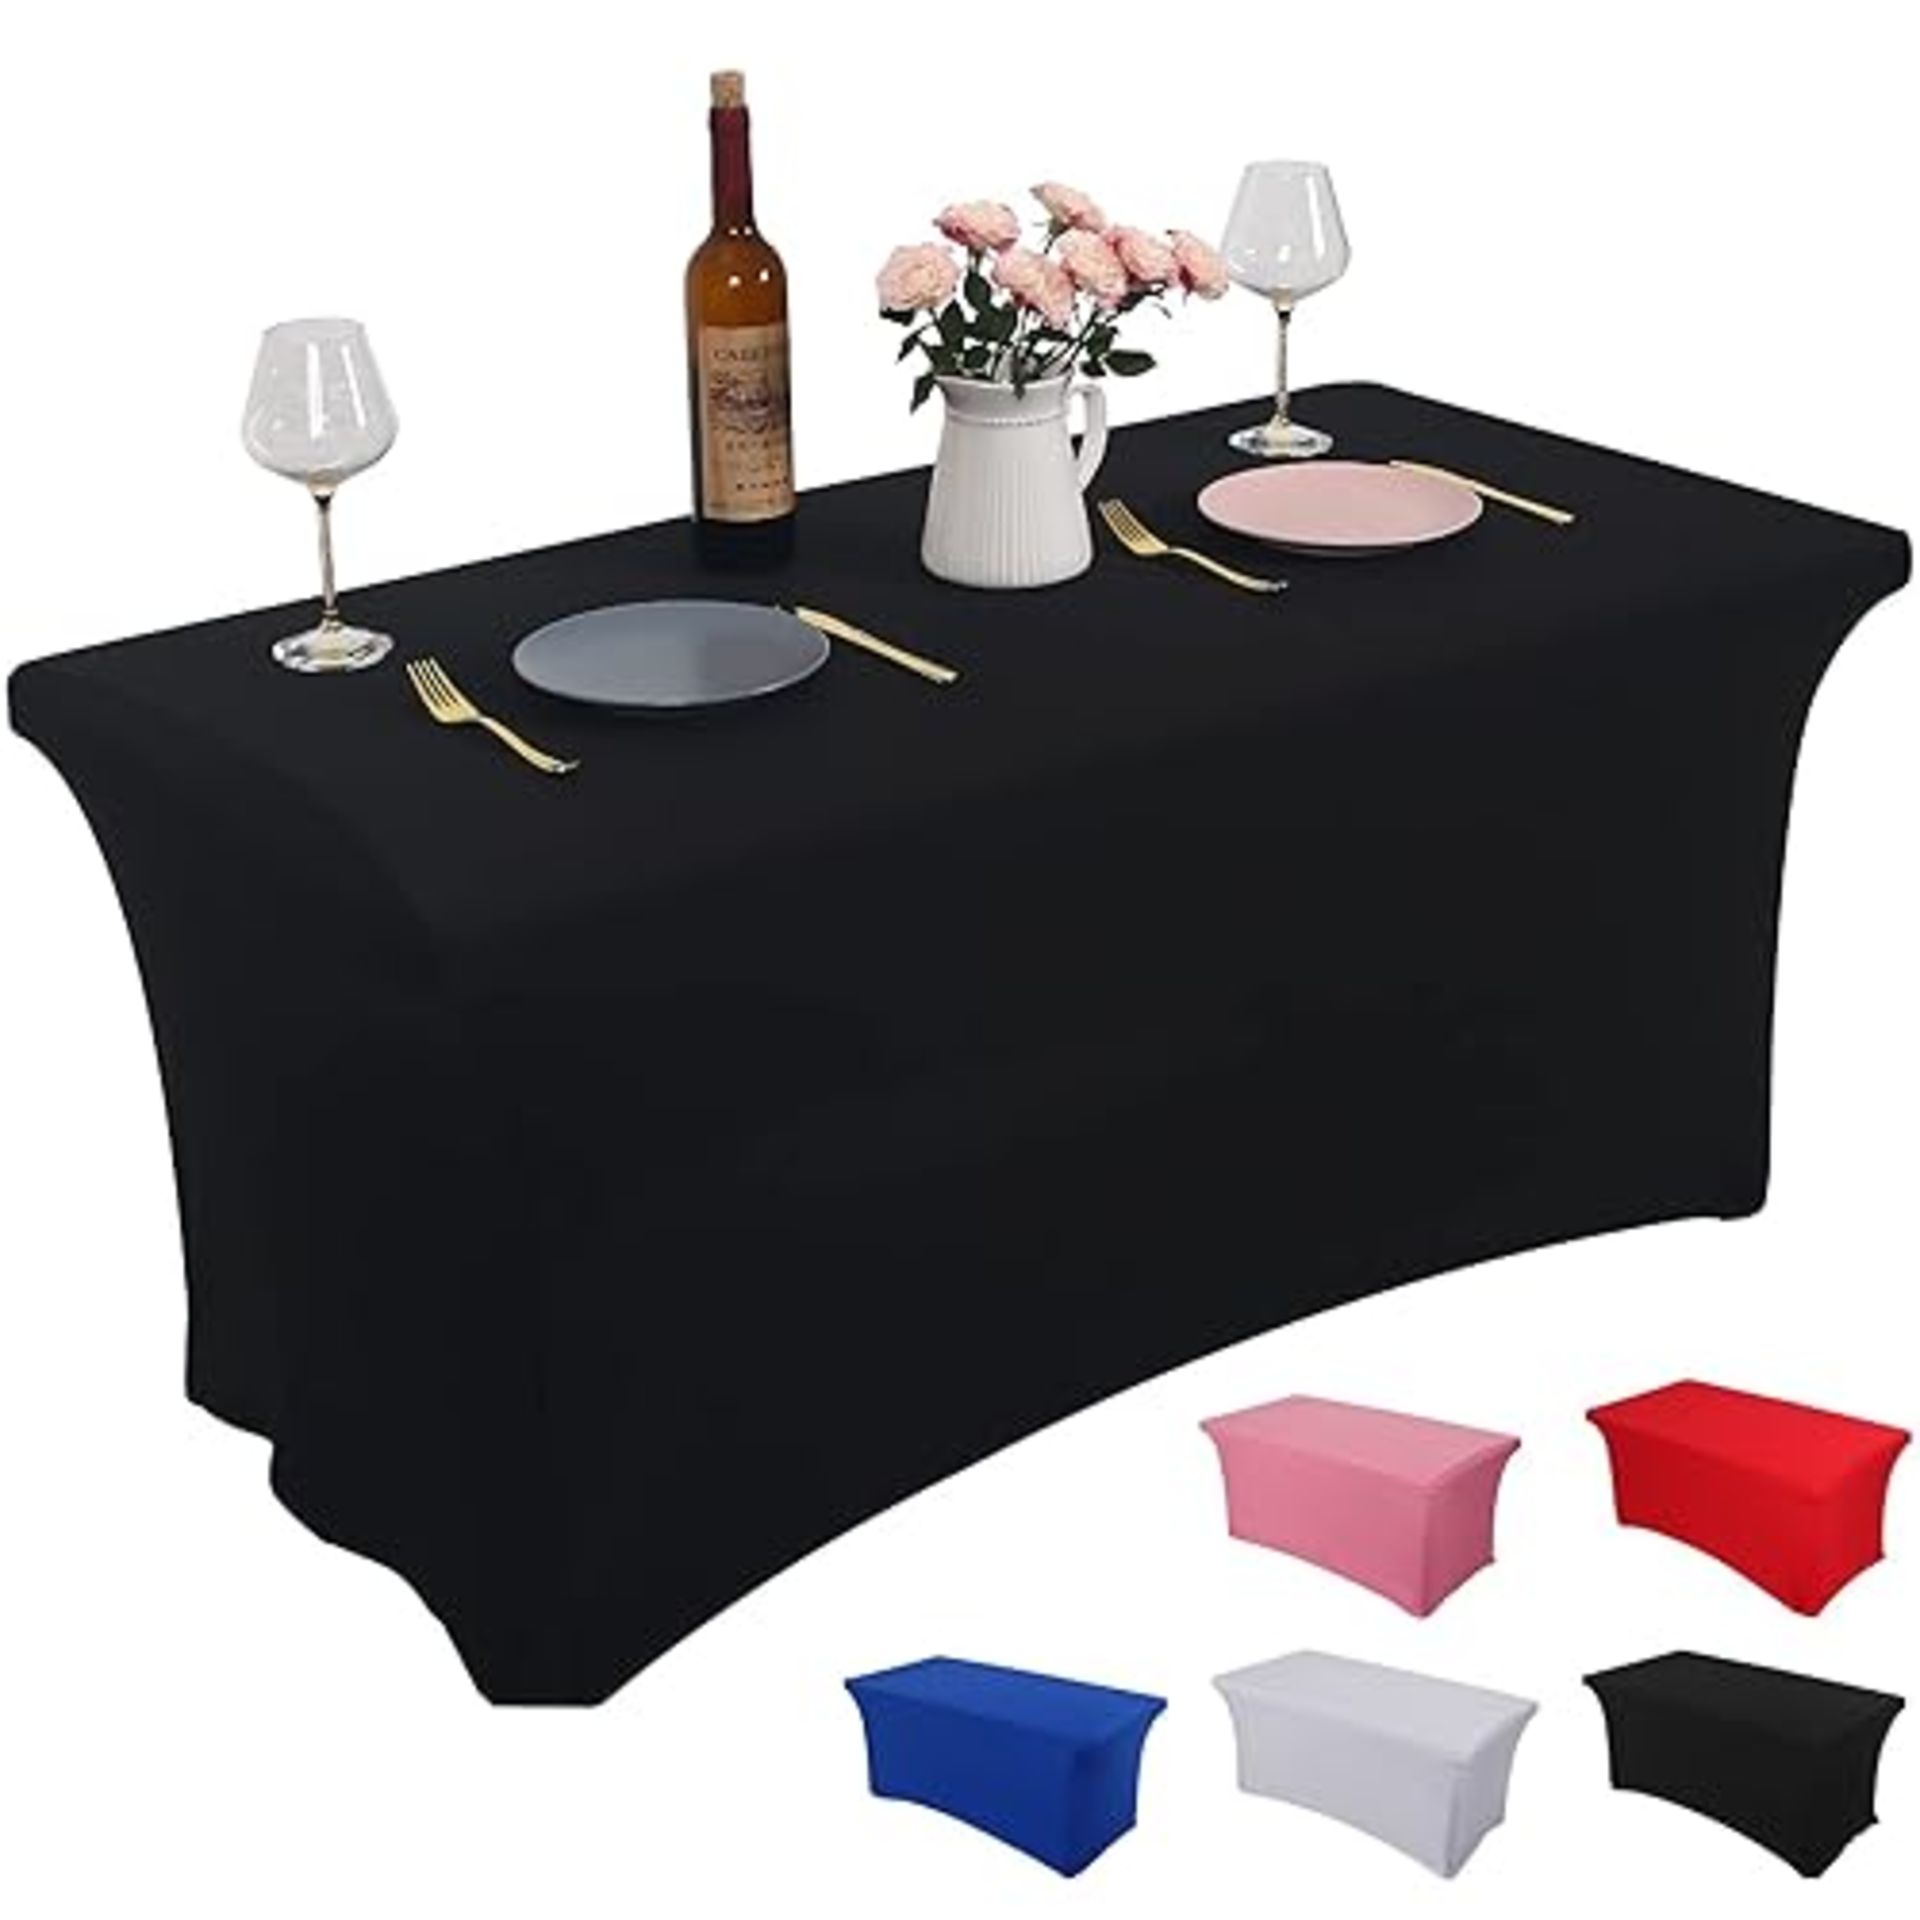 Rainberg 6ft & 4ft Stretchable Tablecloths for Rectangle Tables, Table Cover, Fitted Spandex Rectan